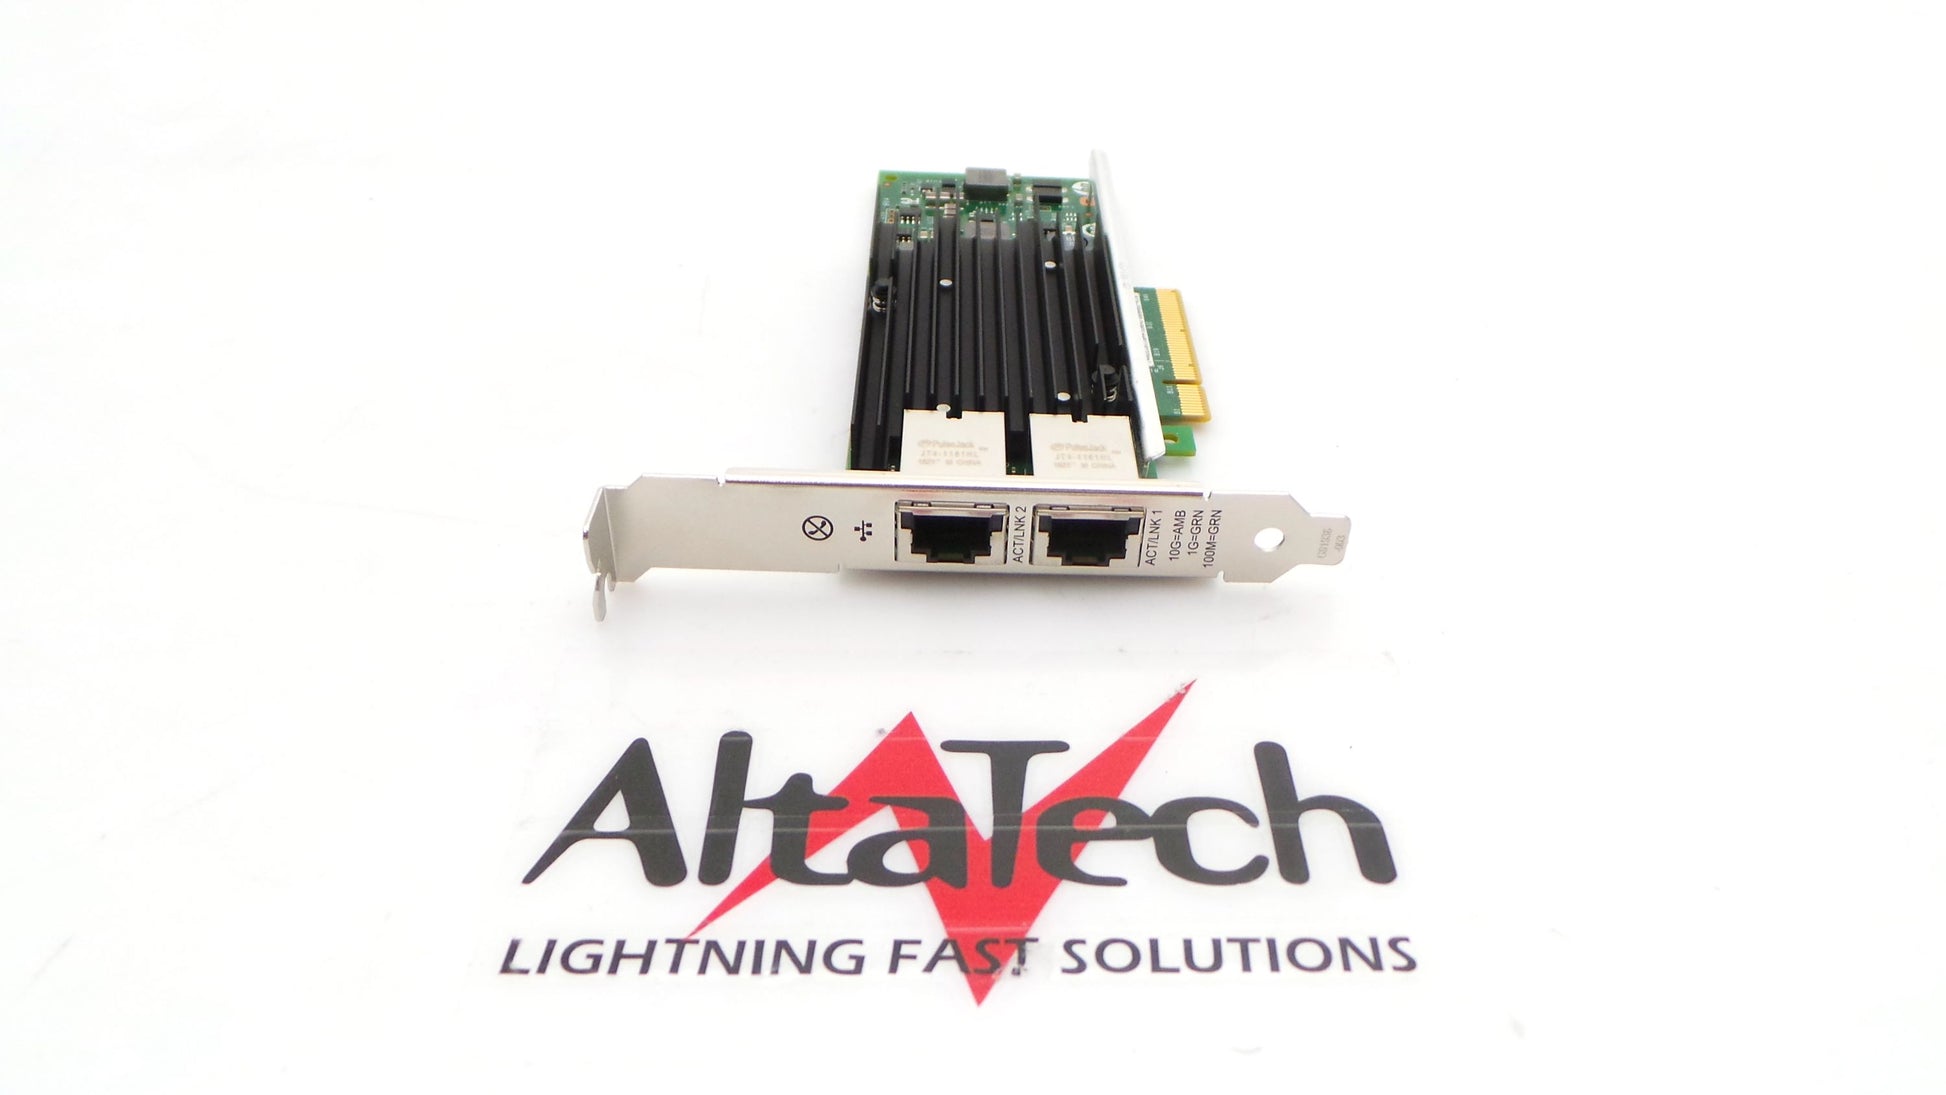 HP 716591-B21 10GB Dual Port 561T Ethernet Adapter (717708-001/717708-002), Used